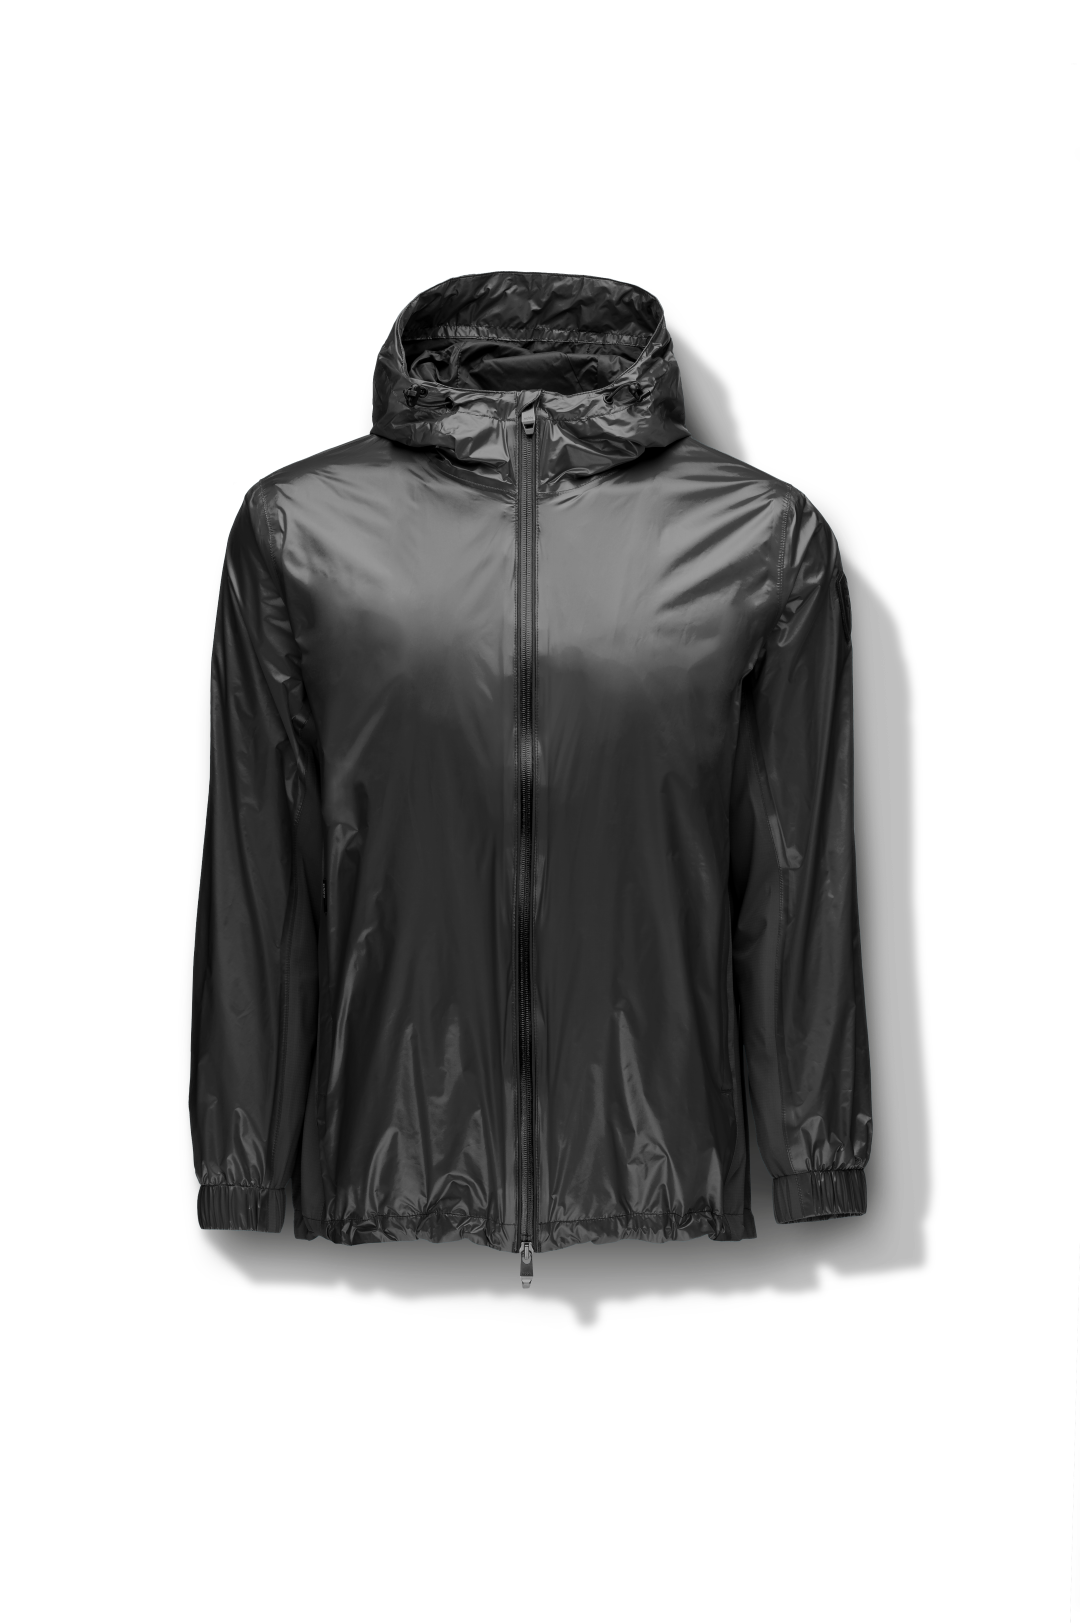 Stratus Men's Tailored Packable Rain Jacket in hip length, premium cire technical nylon taffeta and stretch ripstop fabrication, highly breathable mesh lining, hidden packable pocket, non-removable hood with adjustable draw cord, reflective piping along front and back, underarm grommets for extra breathability, back yoke with mesh ventilation, two waist zipper pockets, two interior zipper pockets, elastic cuffs with adjustable snap button, and adjustable interior draw cord at waist hem, in Black